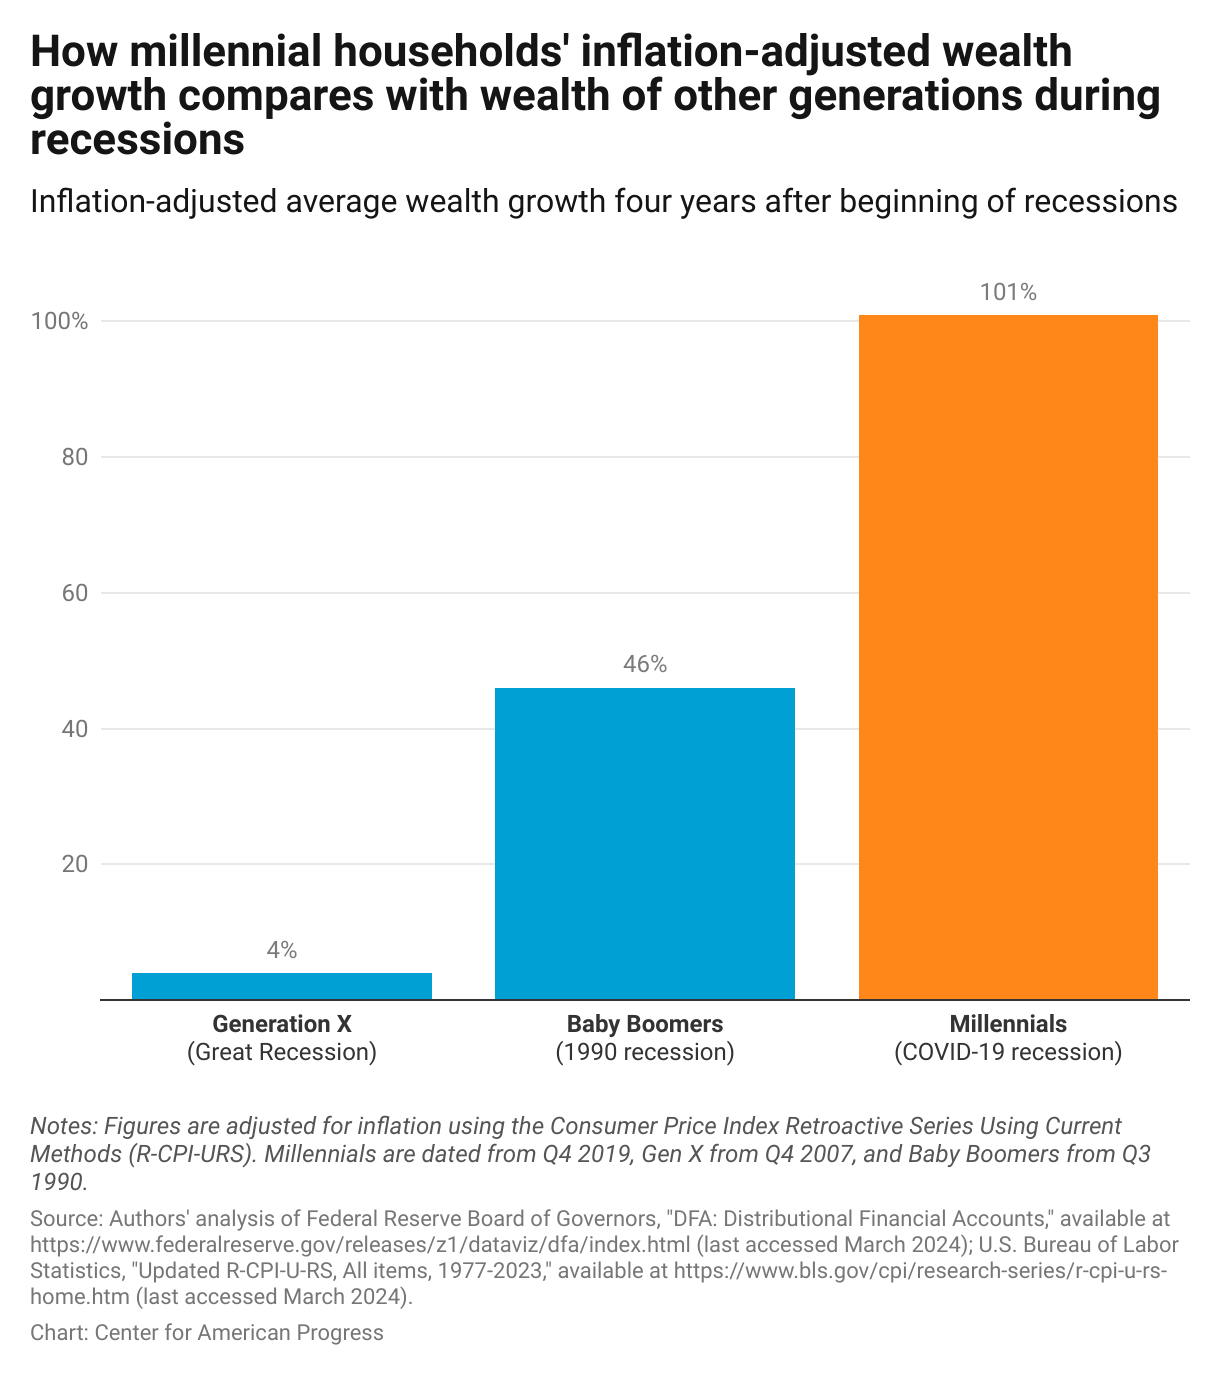 Chart showing that millennials' inflation-adjusted average wealth grew 101 percent four years after the beginning of the COVID-19 recession, compared with 4 percent for Gen X after the Great Recession and 61 percent for Baby Boomers after the 1990 recession.